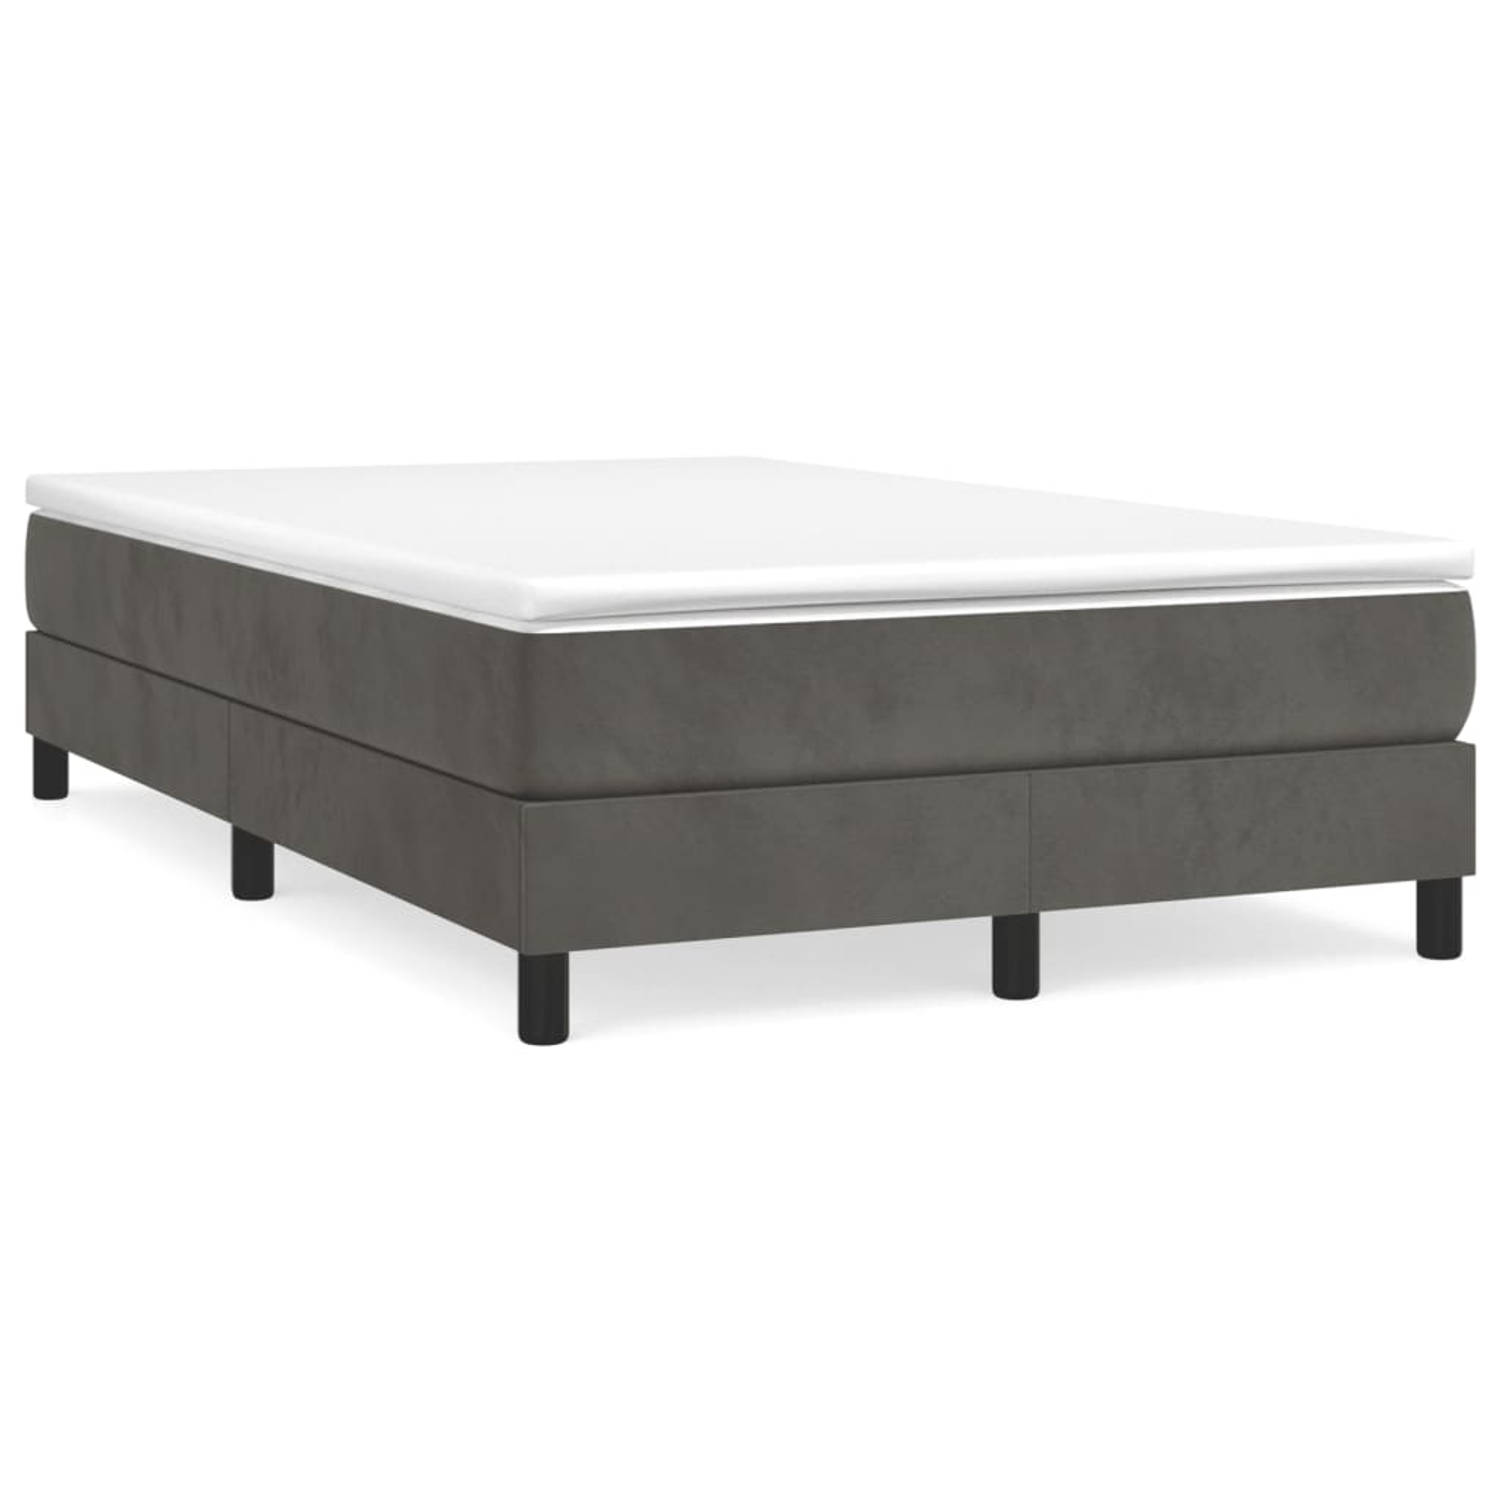 The Living Store Boxspringframe fluweel donkergrijs 120x200 cm - Bed